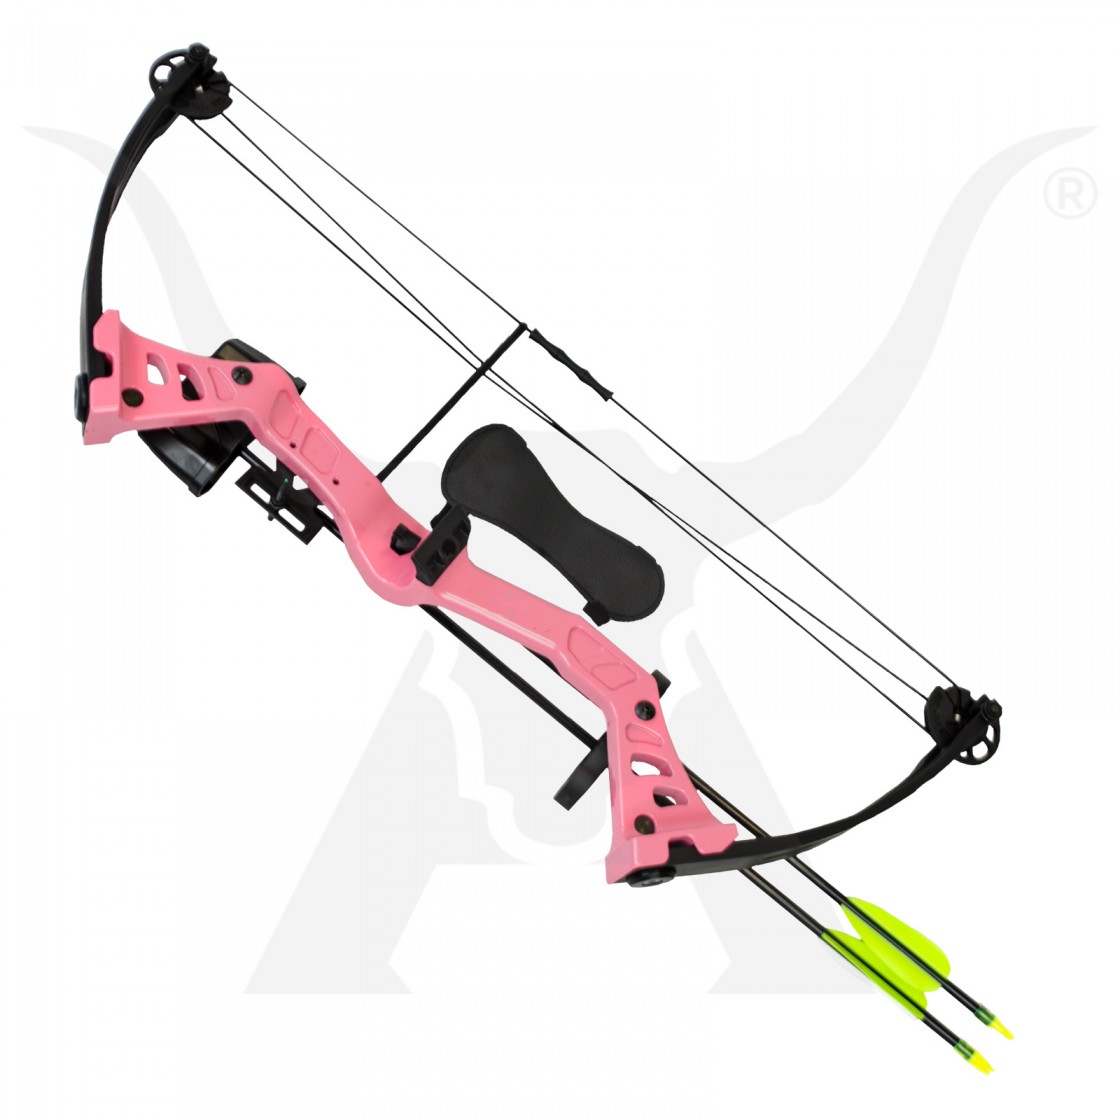 Introducing The Junxing M129 : A Most Modern Compound Bow